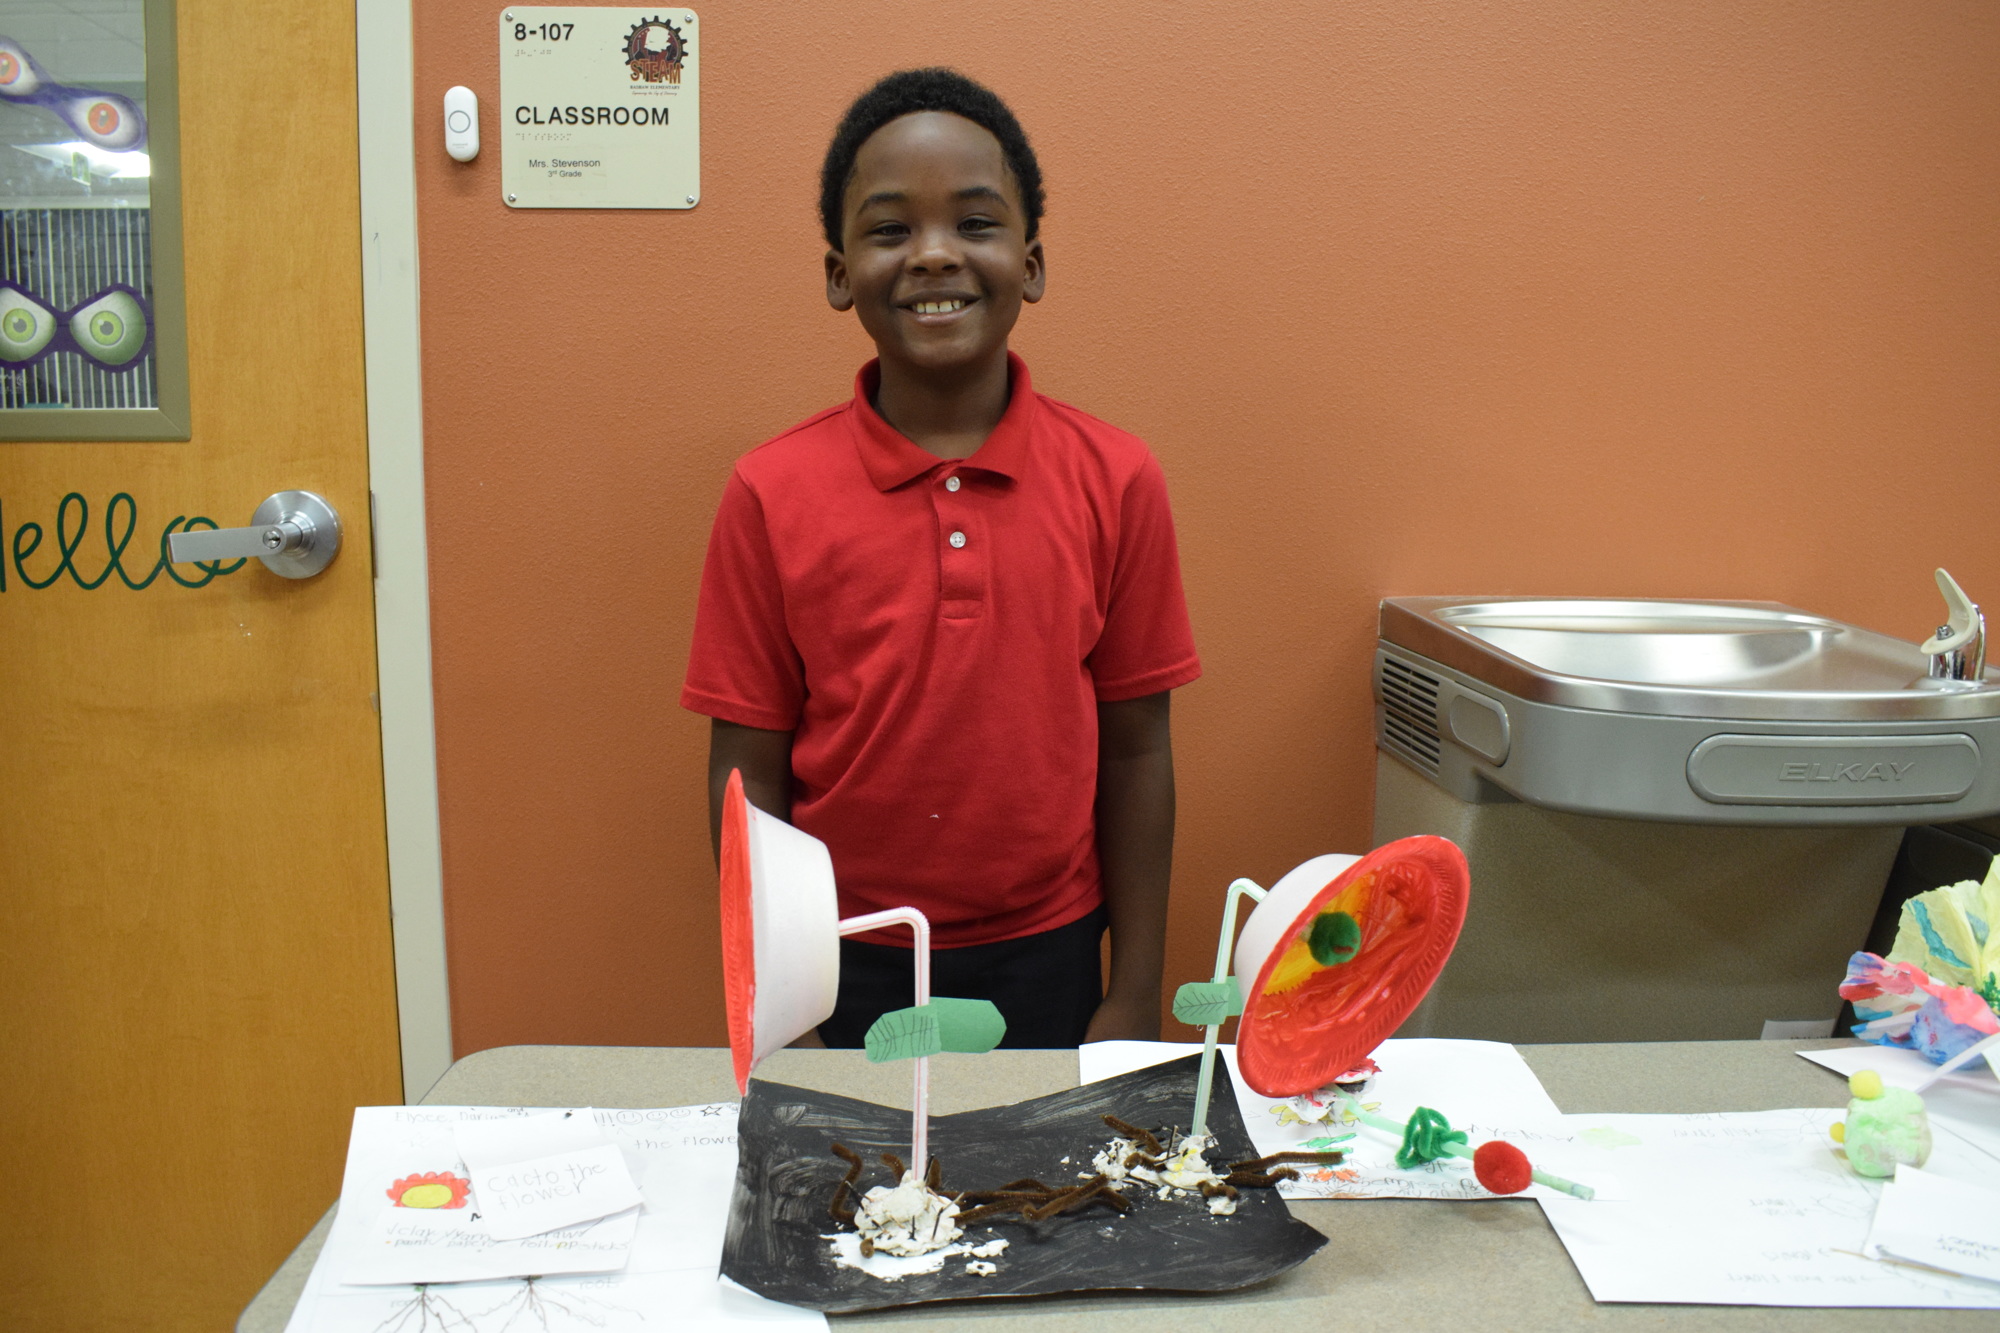 Elysee Thelusma, a third grader, shows off the plant he created using clay, straws, paper, foil, pipe cleaners and other items. He calls it 